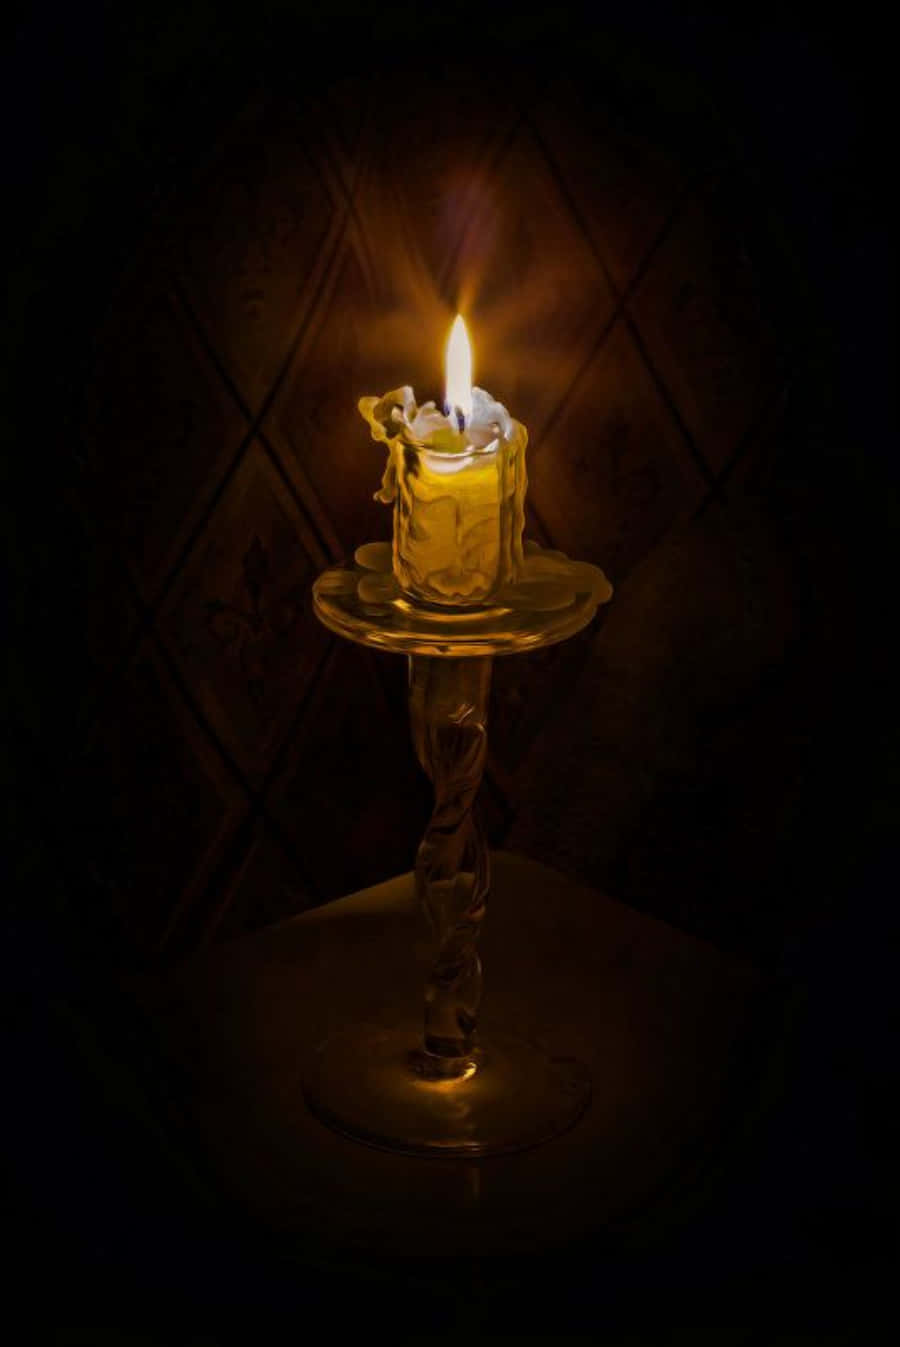 A Candle Is Lit In A Glass Cup